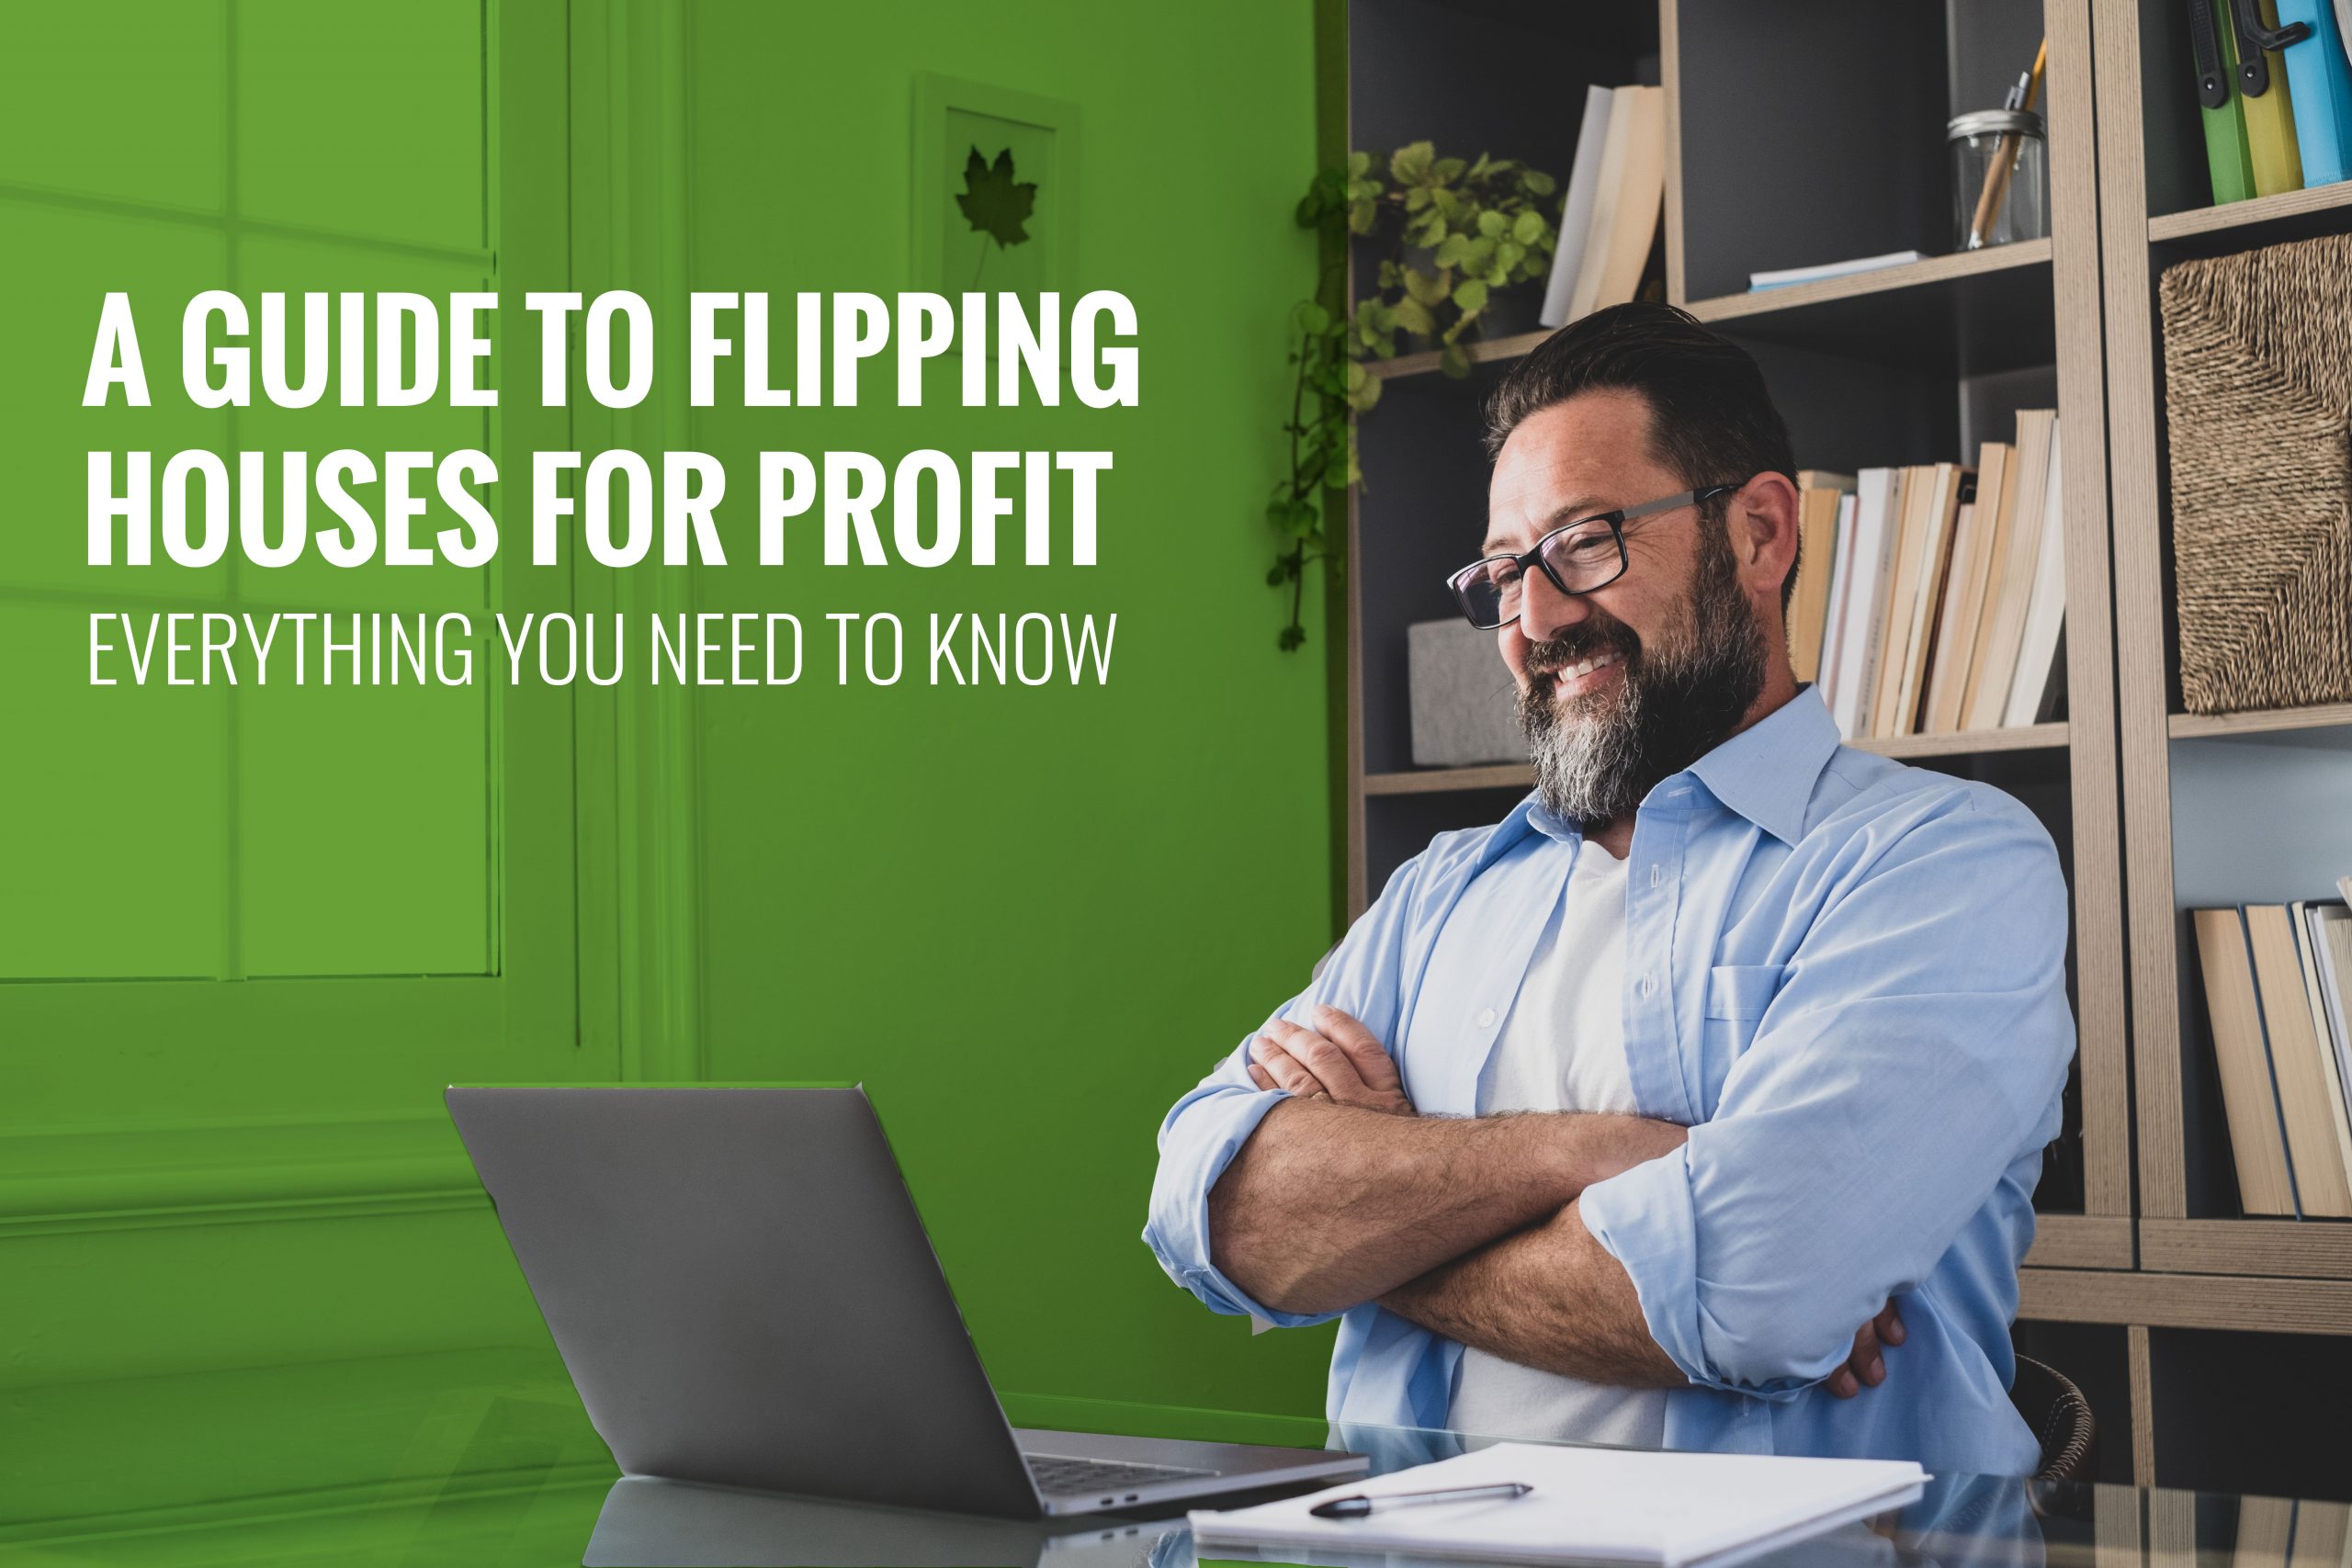 A Guide to Flipping Houses for Profit